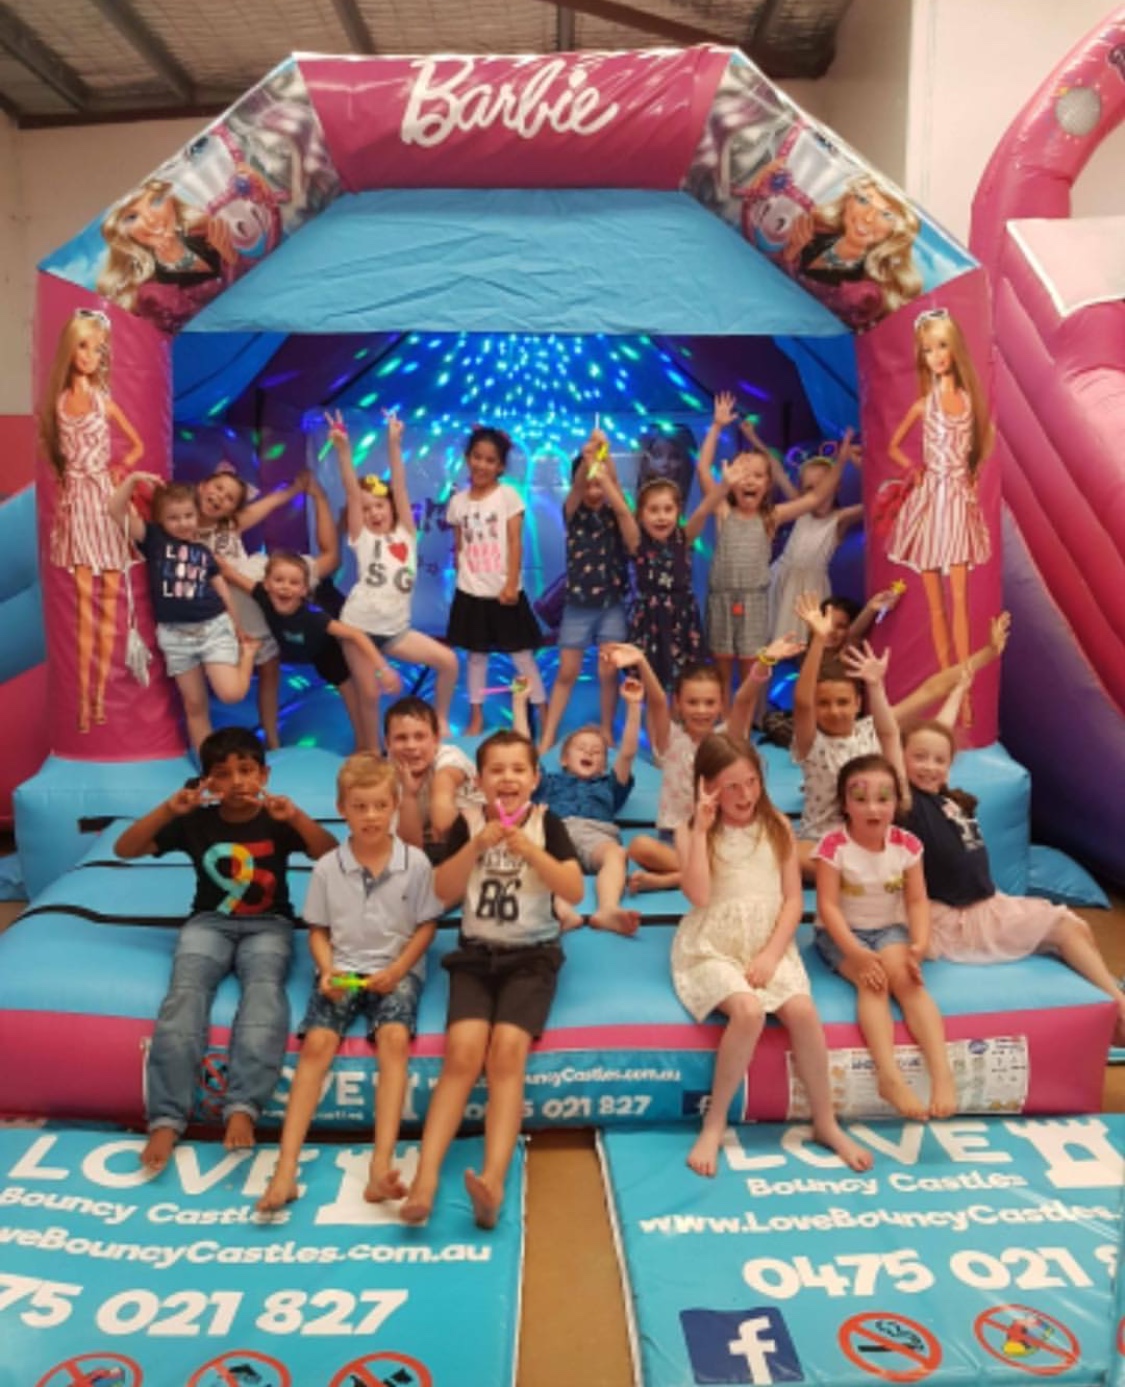 Copy of Kids Party With Children Playing On A Barbie Bouncy Castle That Was Hired Out In Perth